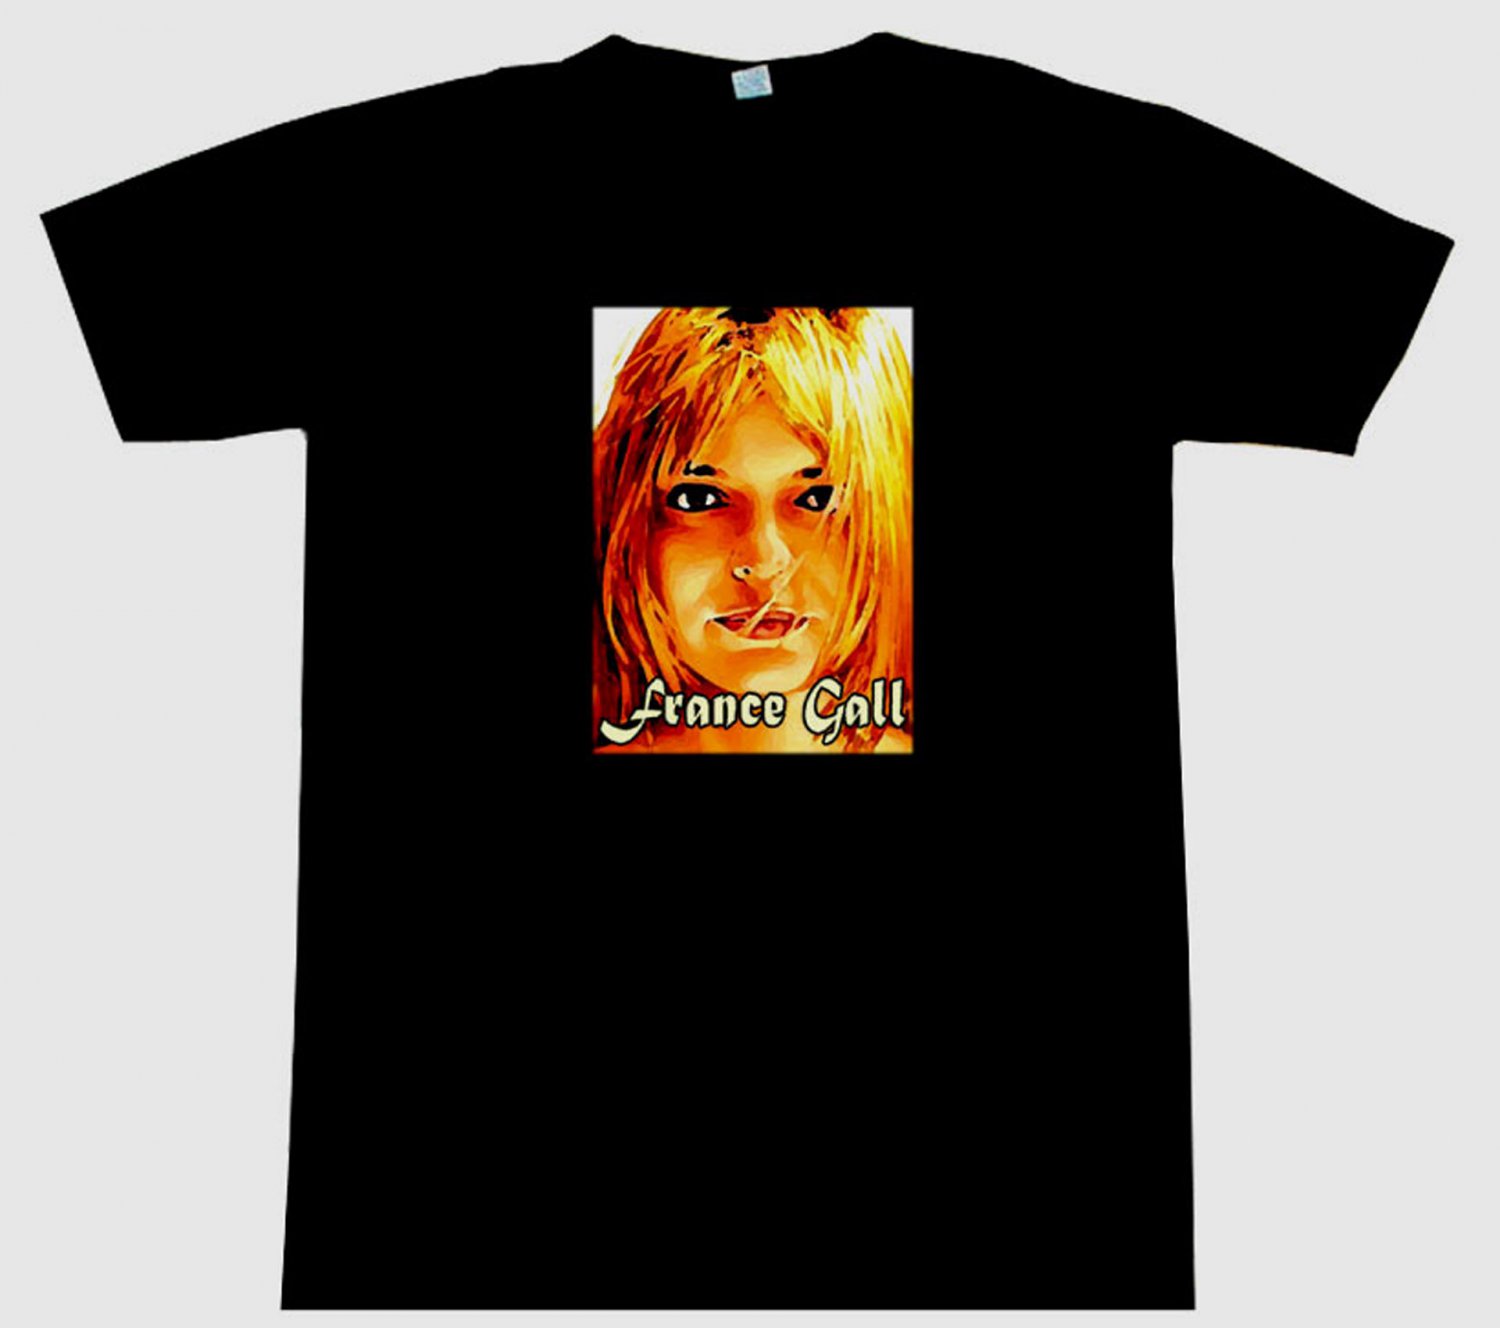 France Gall EXCELLENT Tee T-Shirt